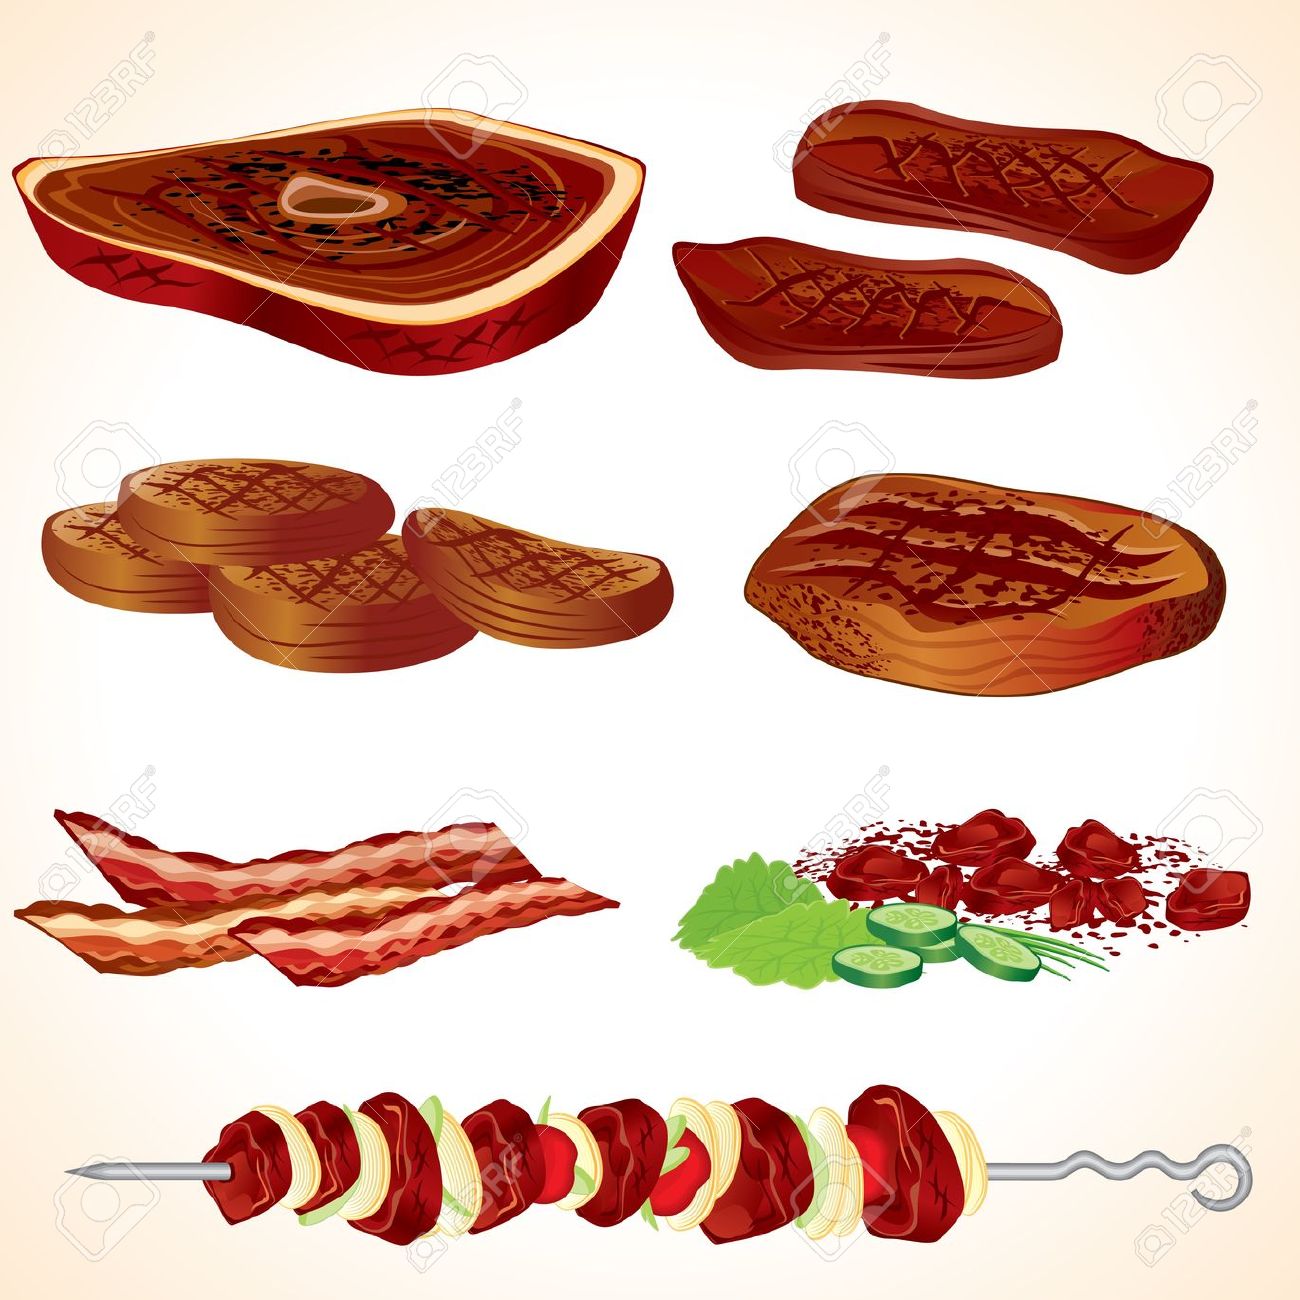 Bacon and steak clipart